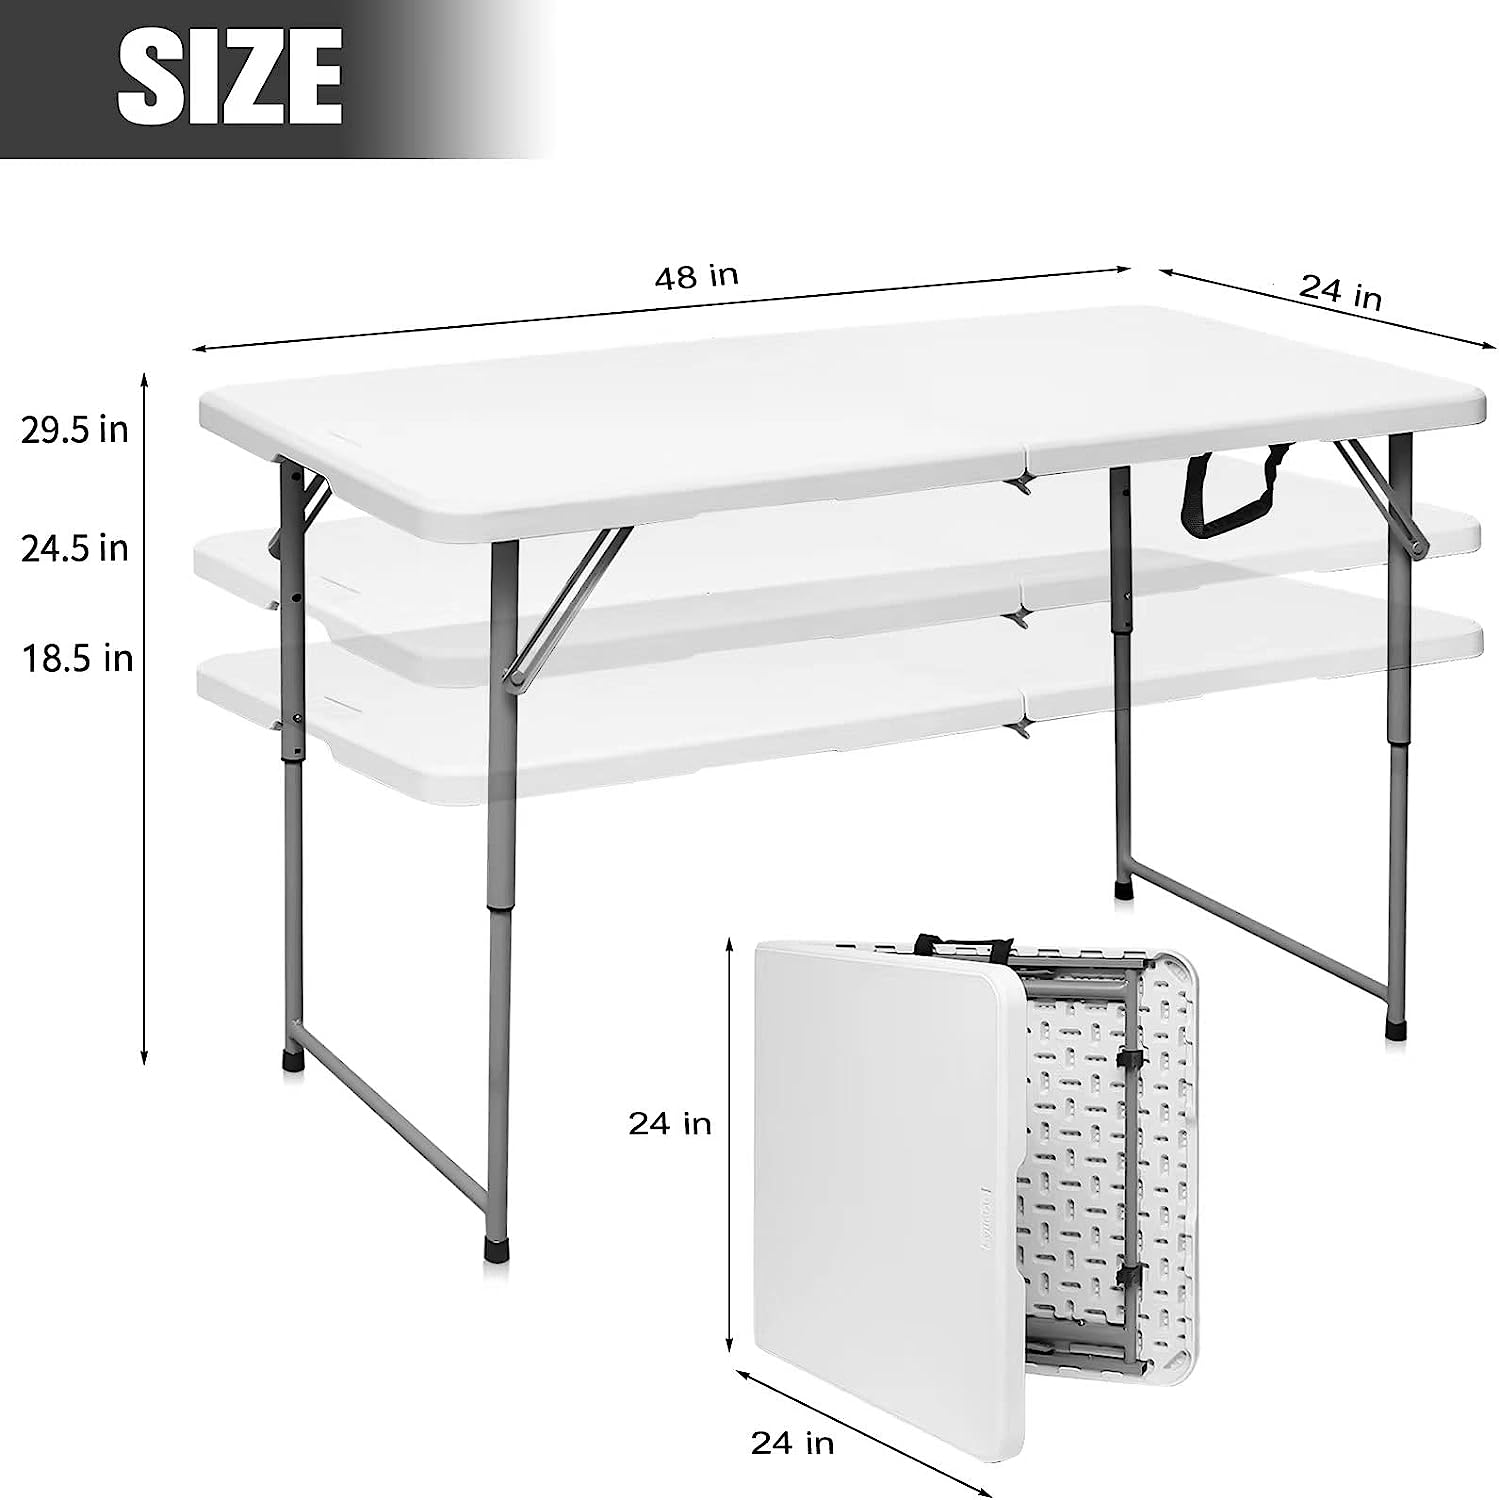 Byliable Folding Table 4 Foot Portable Heavy Duty Plastic Fold-in